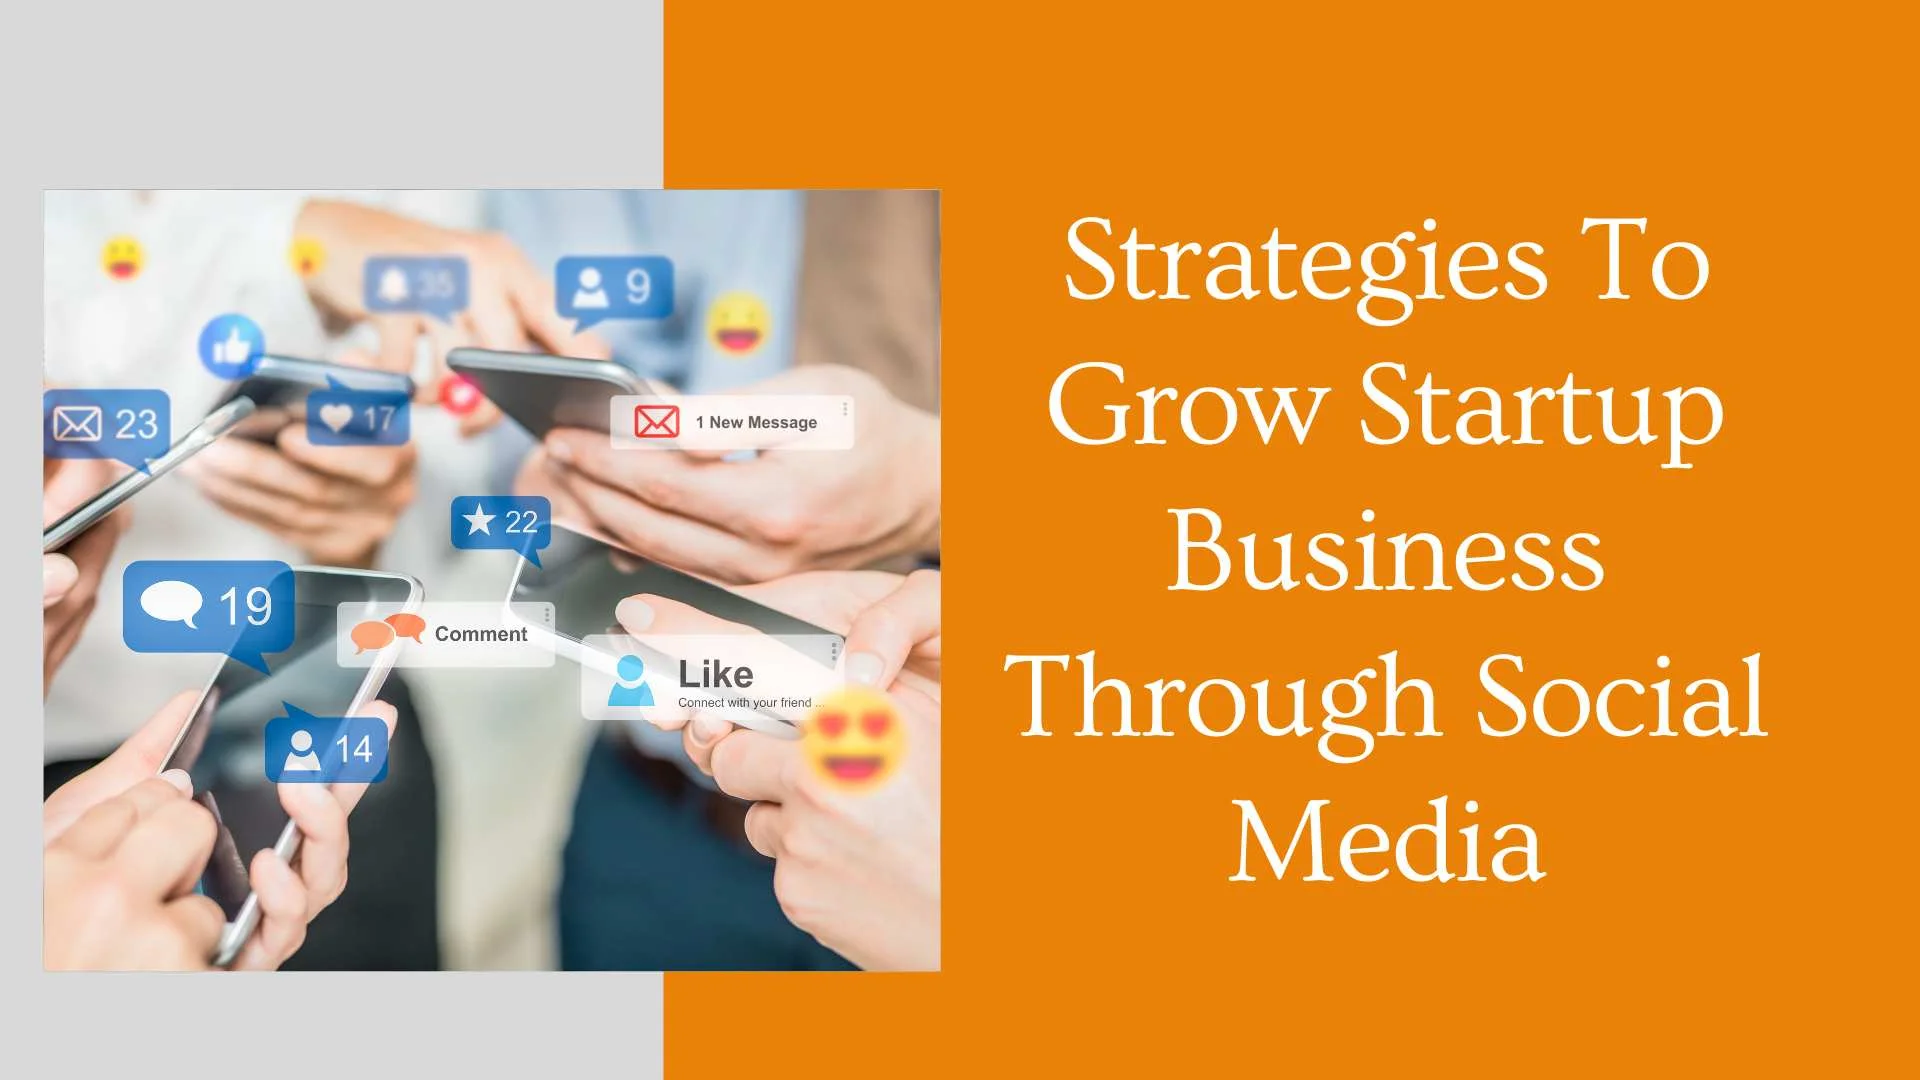 Strategies To Grow Startup Business Through Social Media